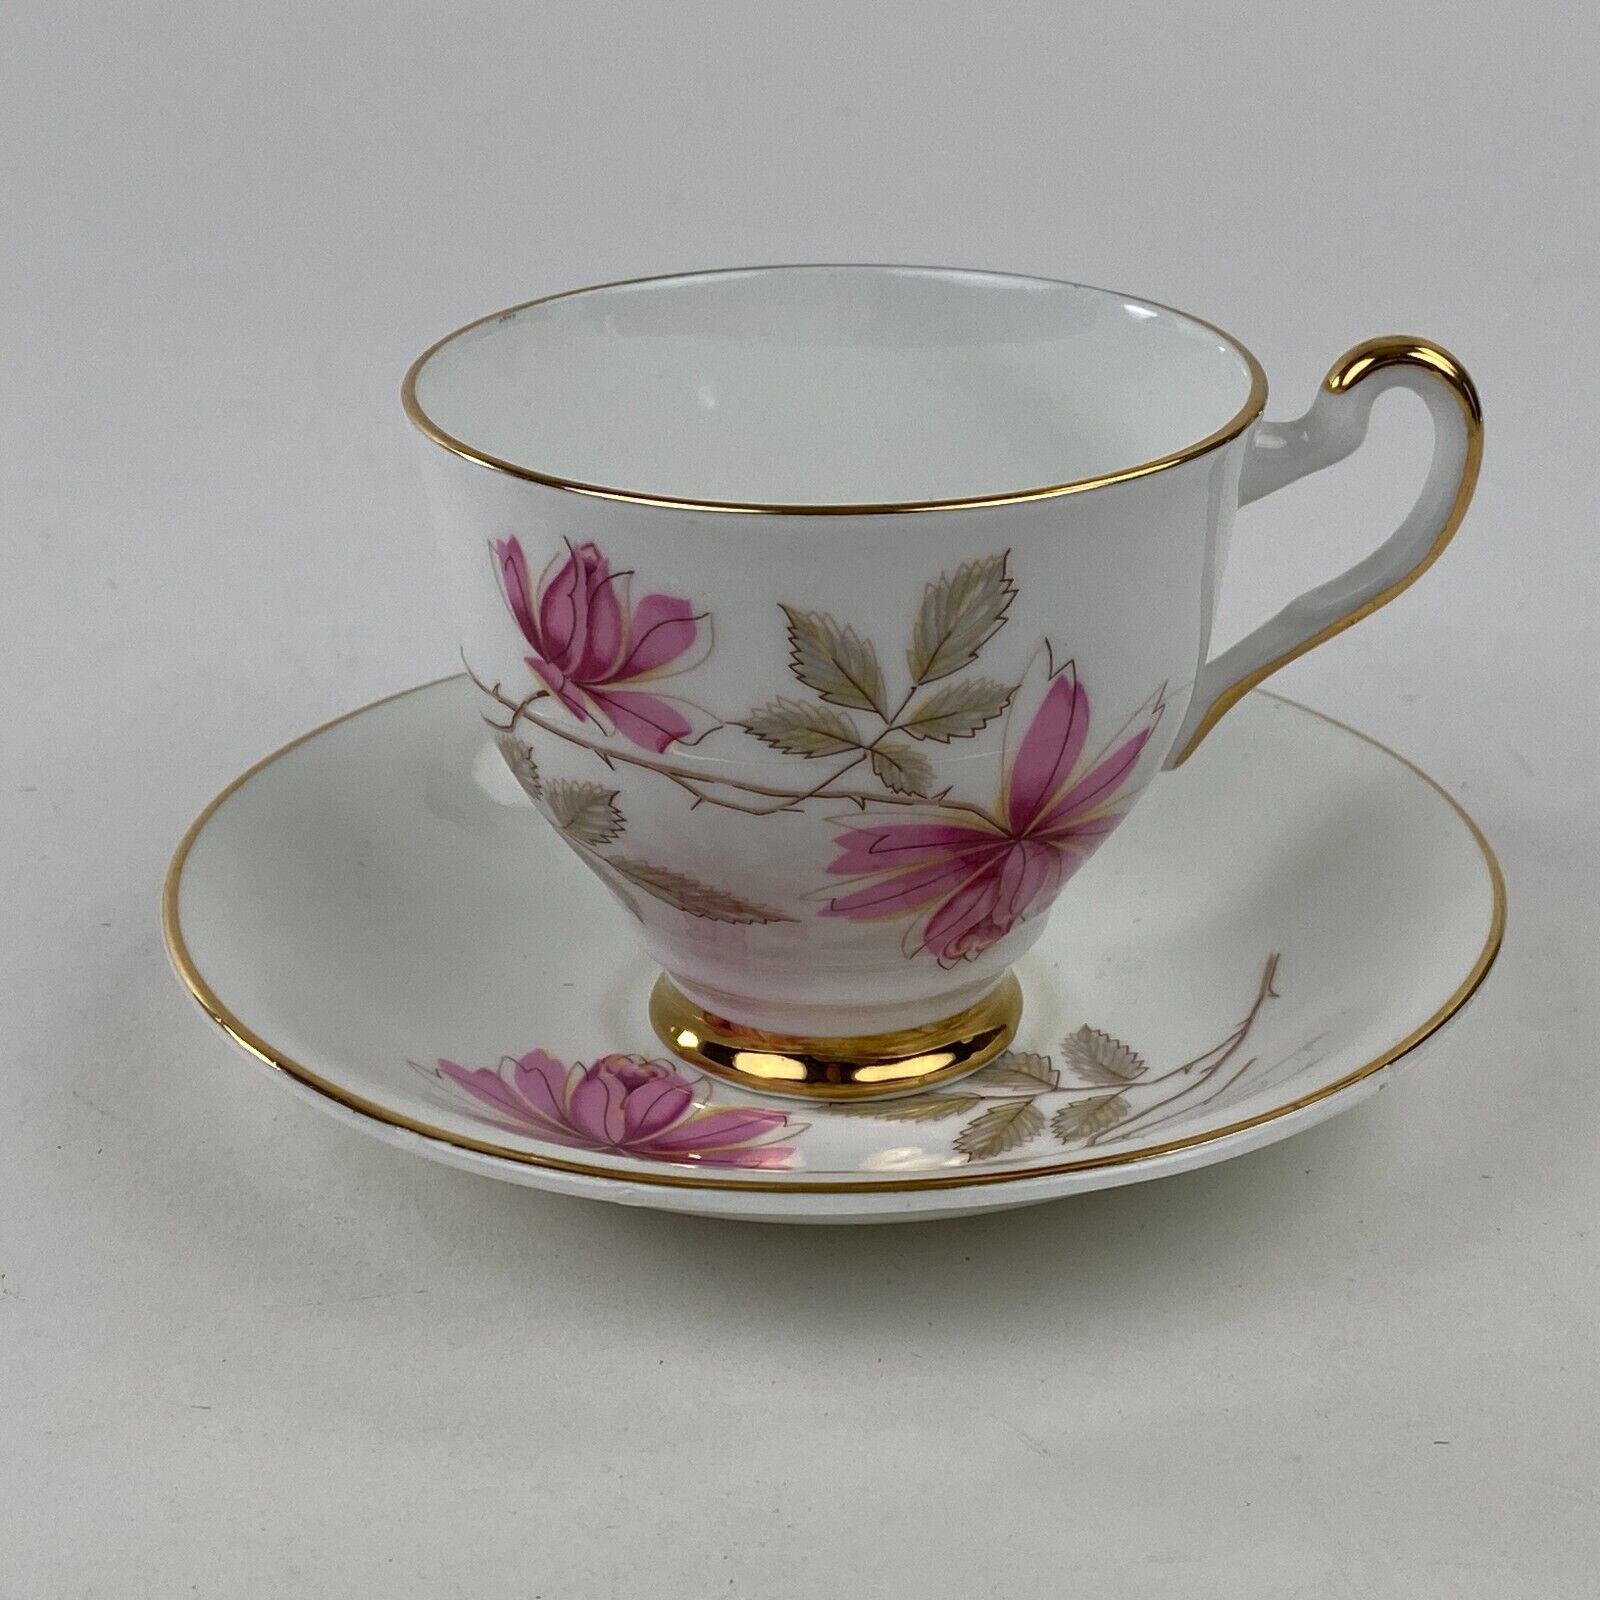 Vintage Royal Taunton Tea Cup and Saucer Pink Floral Bone China Made in England